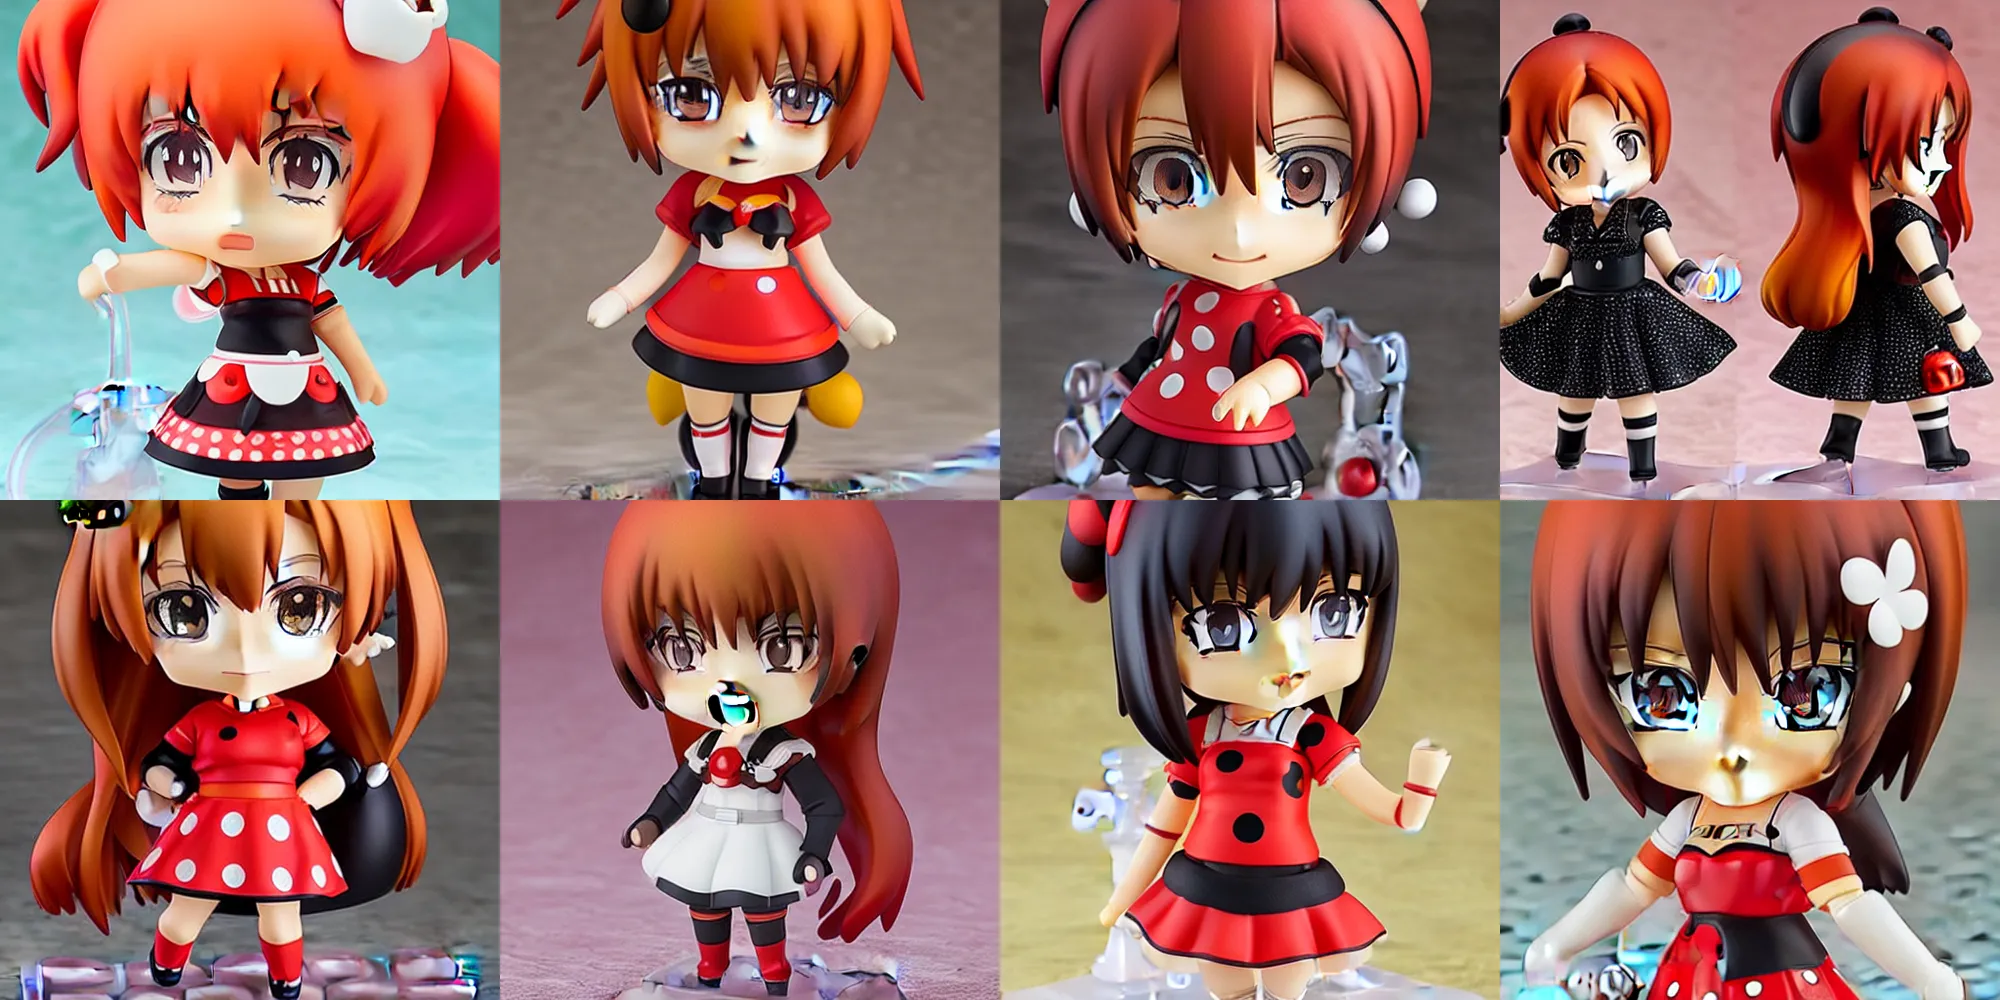 Prompt: an anime nendoroid of a ladybug gijinka with red hair and space buns wearing a polka dot top and black skirt, figurine, detailed product photo